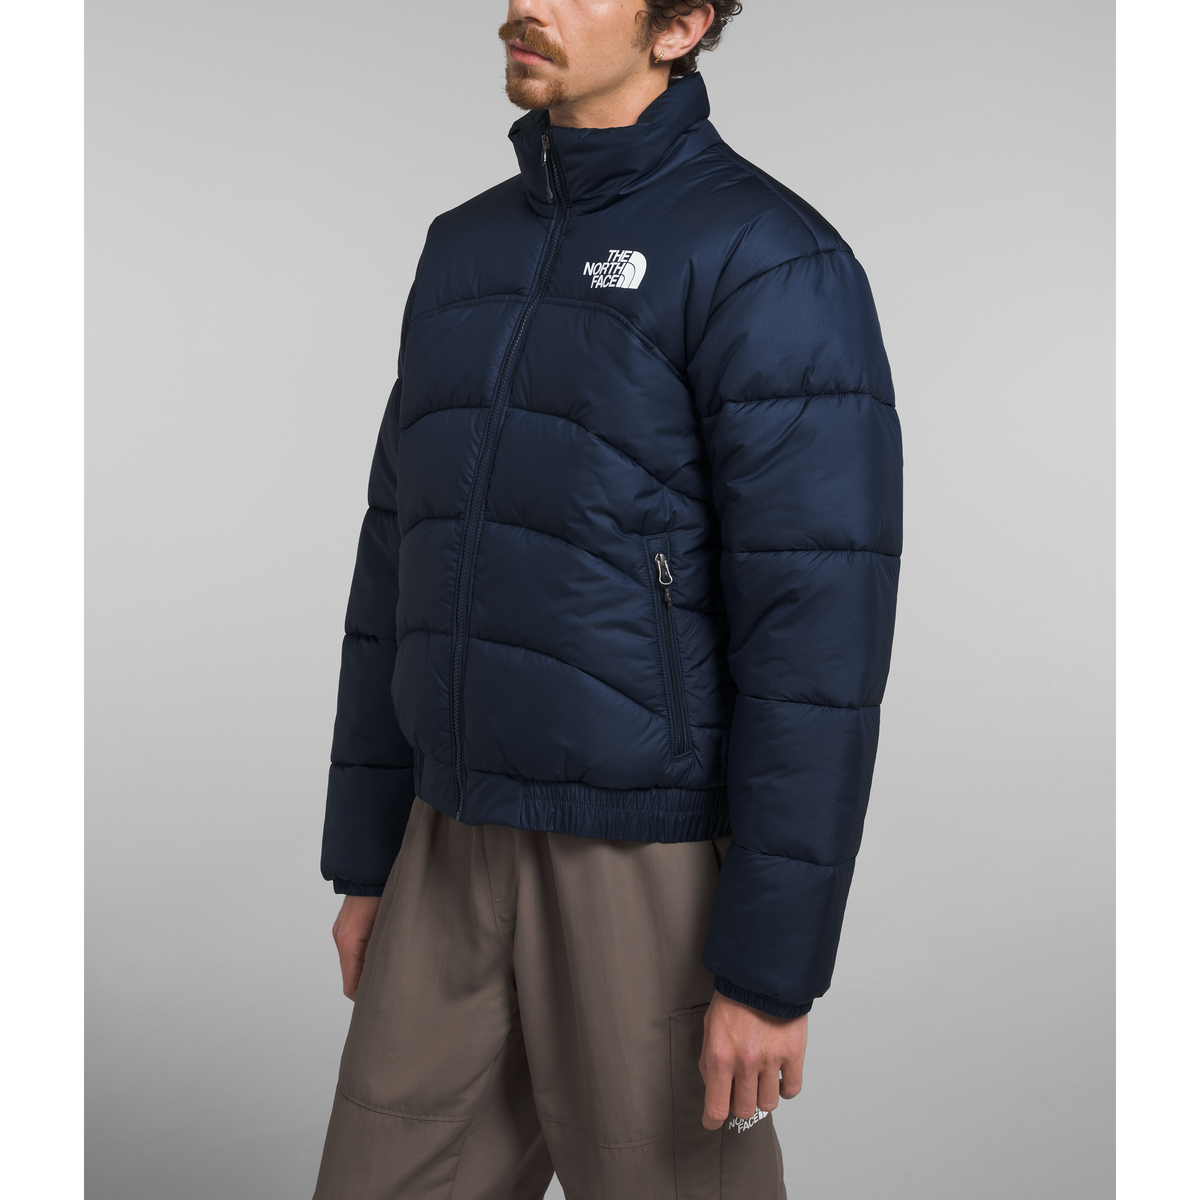 The North Face Men's Jacket 2000 in Summit Navy | Footprint USA